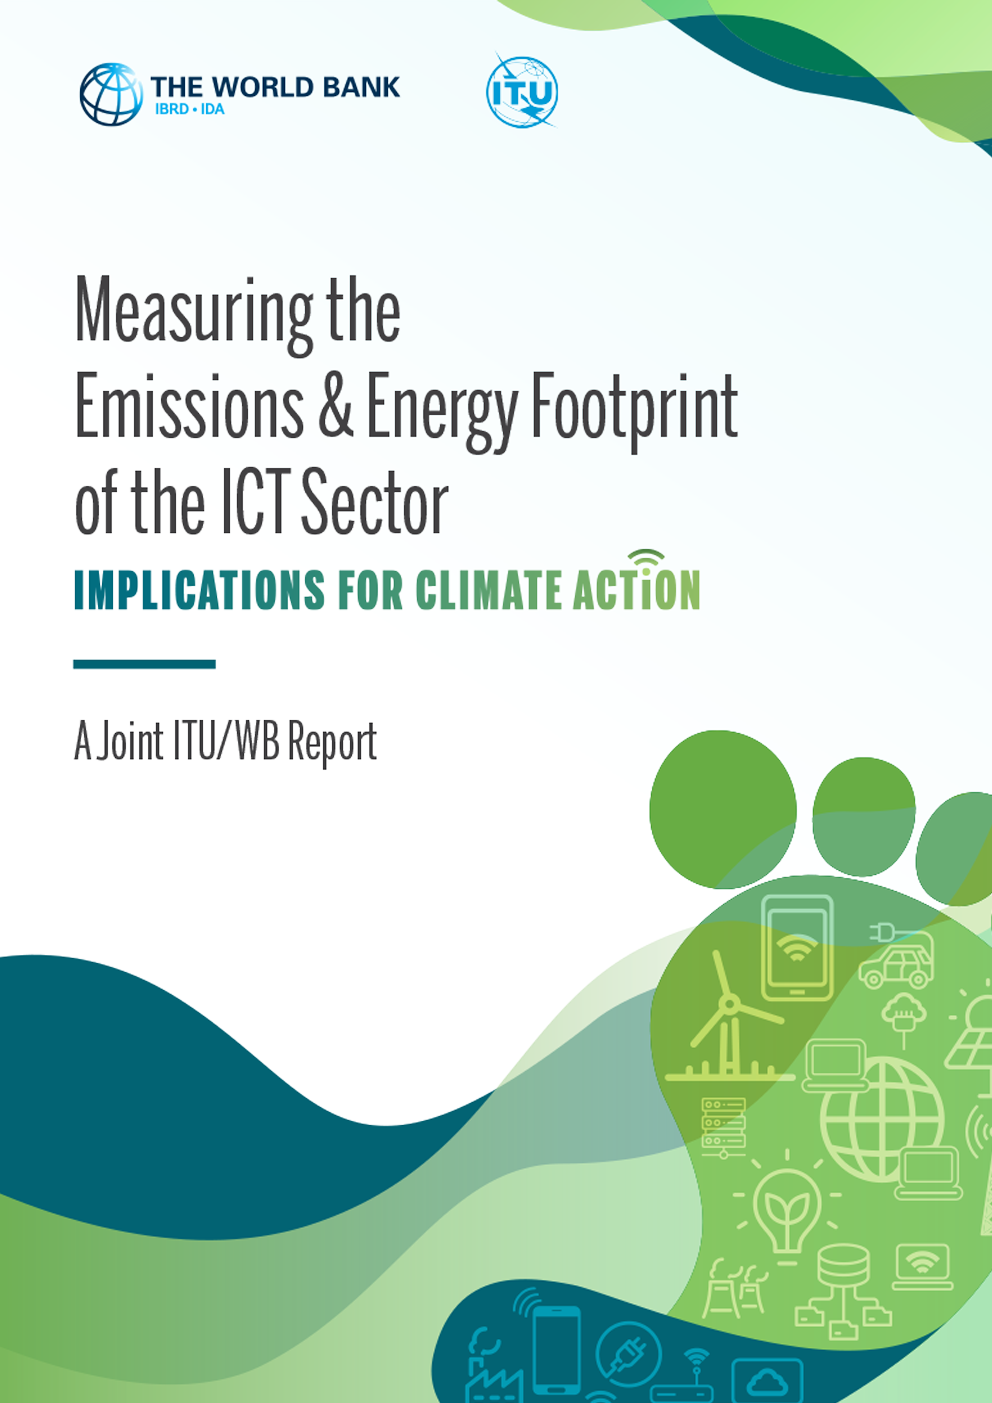 ITU-World Bank joint report: Measuring the Emission & Energy Footprint of the ICT sector   Implications for Climate Action